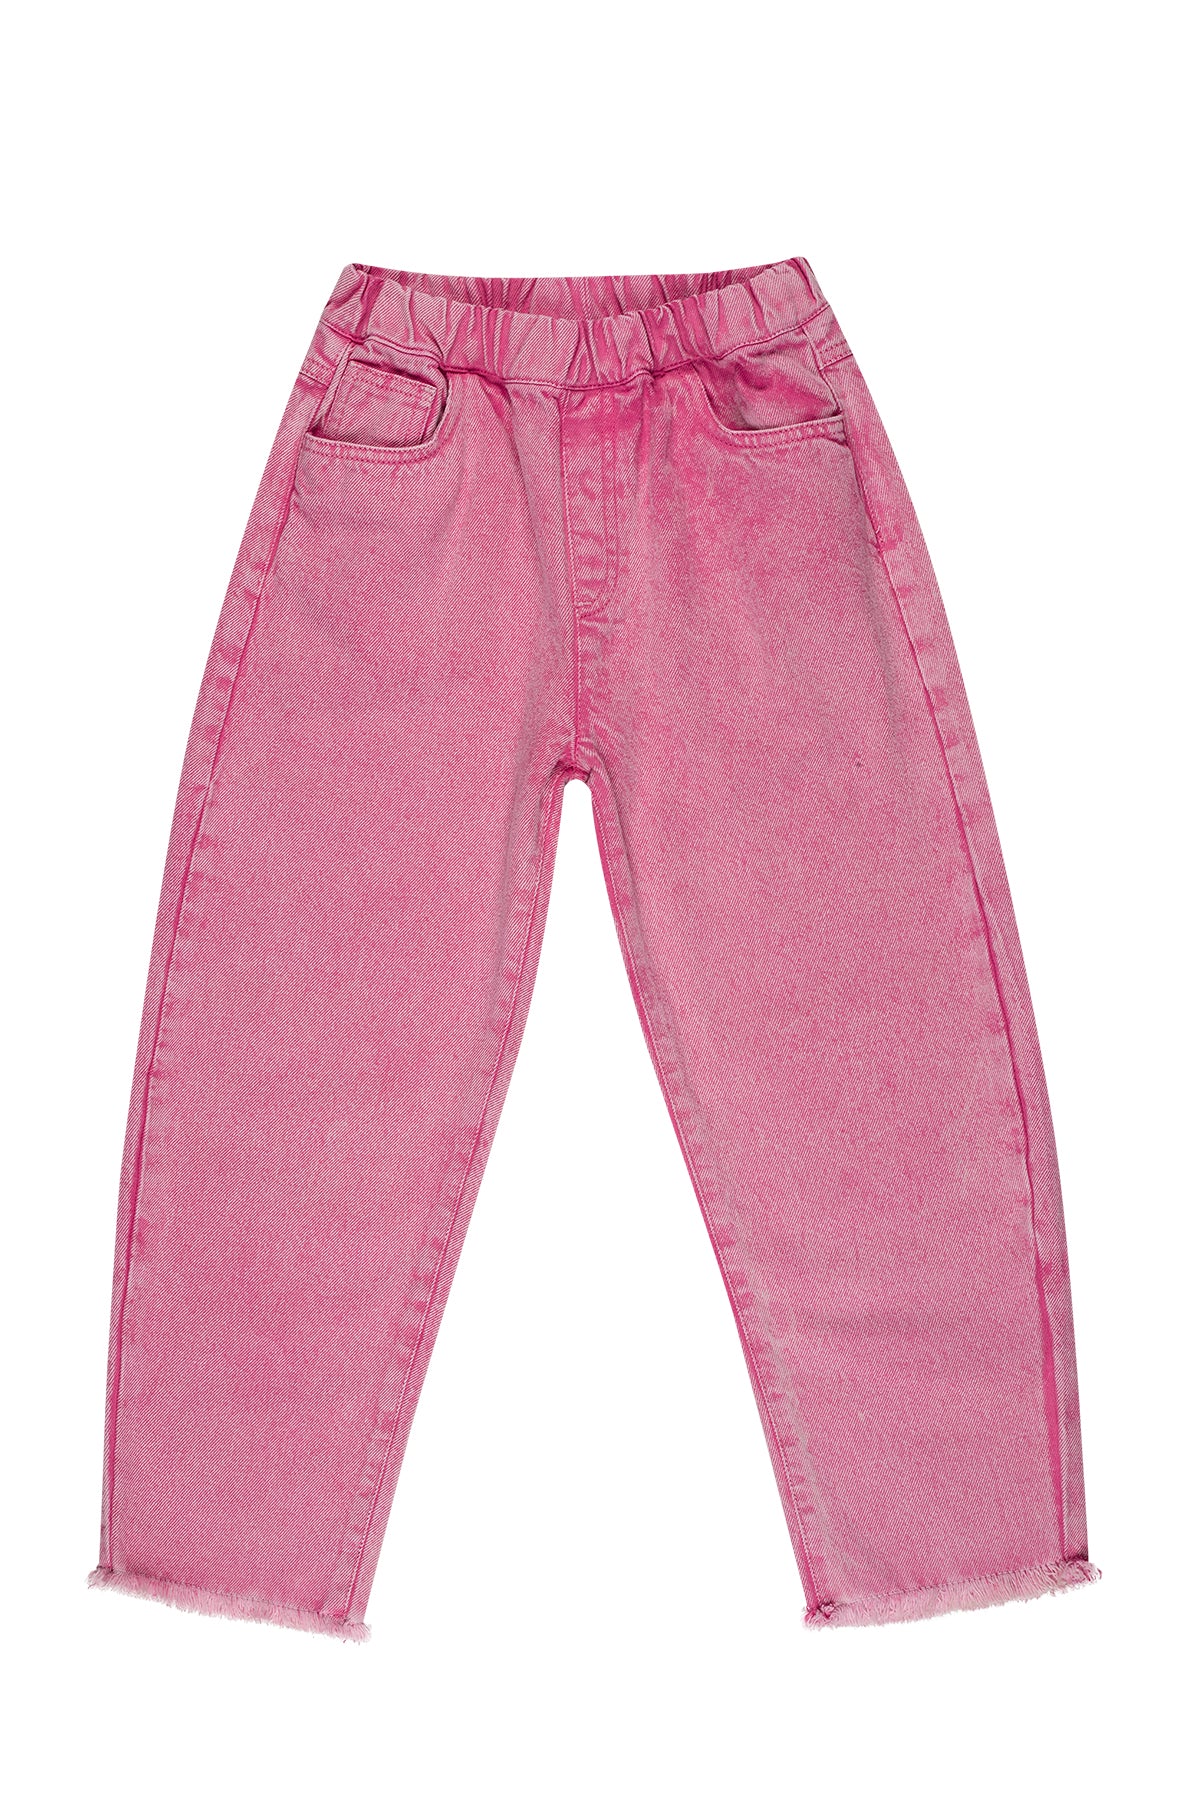 PINK BAGGY TROUSERS ma kids